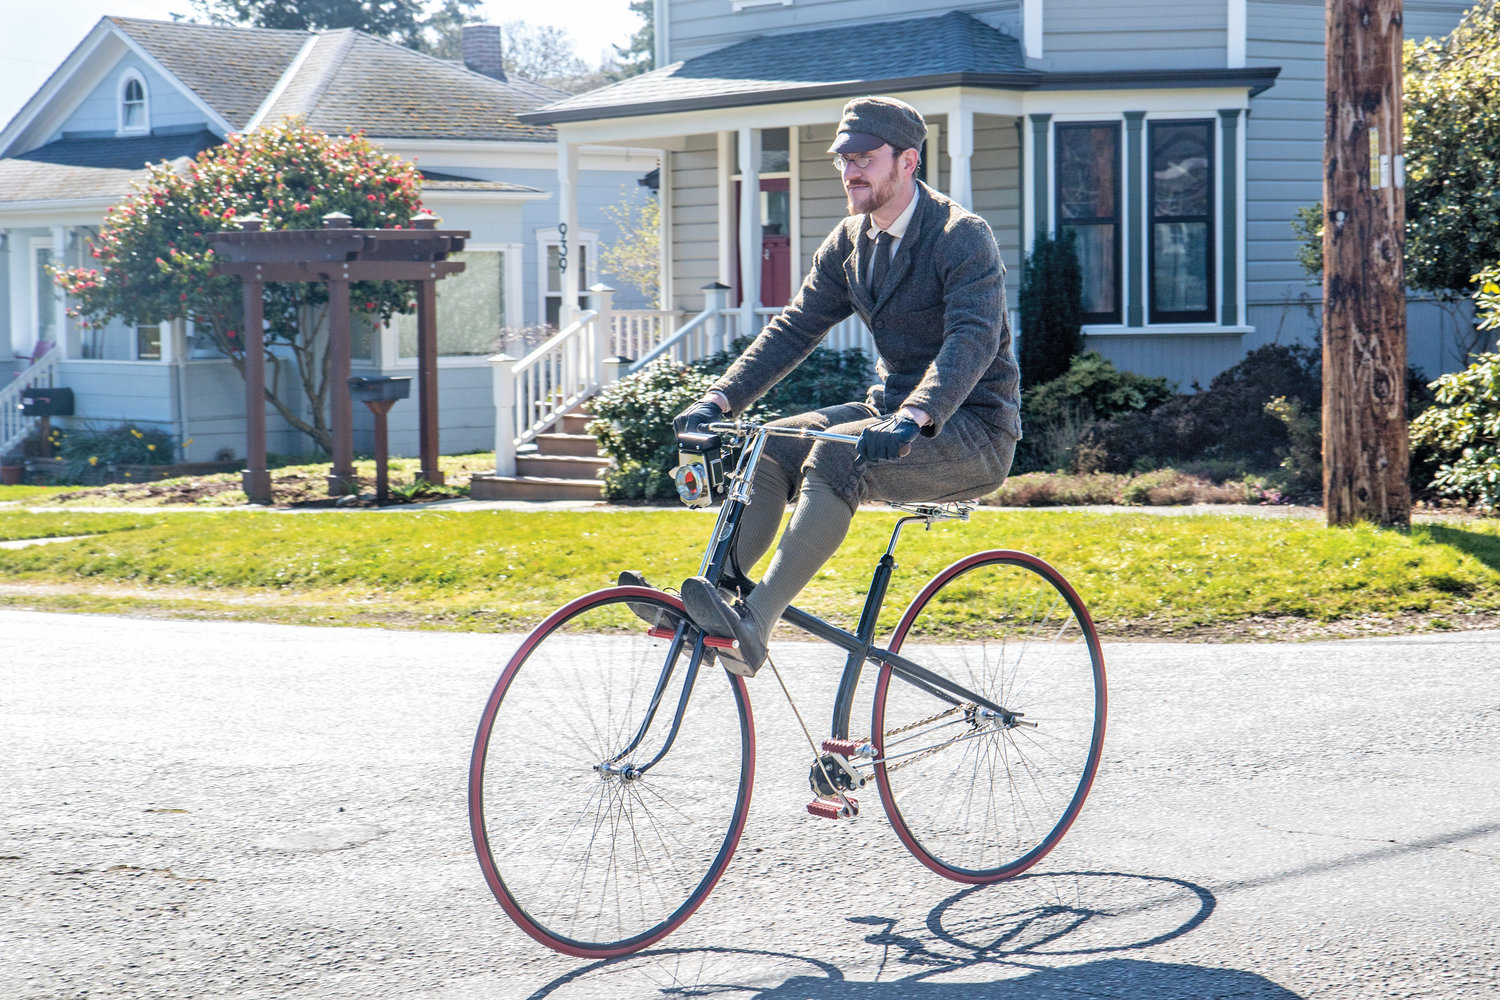 Gabriel Chrisman is an archivist, librarian and historian who specializes in Victorian-era technology such as bicycles. He has created an 1880s historical replica of a hard tire cross-frame safety bike to be used as a prop in a new period drama on HBO. Here, he coasts down a hill on the “safety bike,” using the coasting pedals that allowed riders to rest their feet while the pedals still turned.